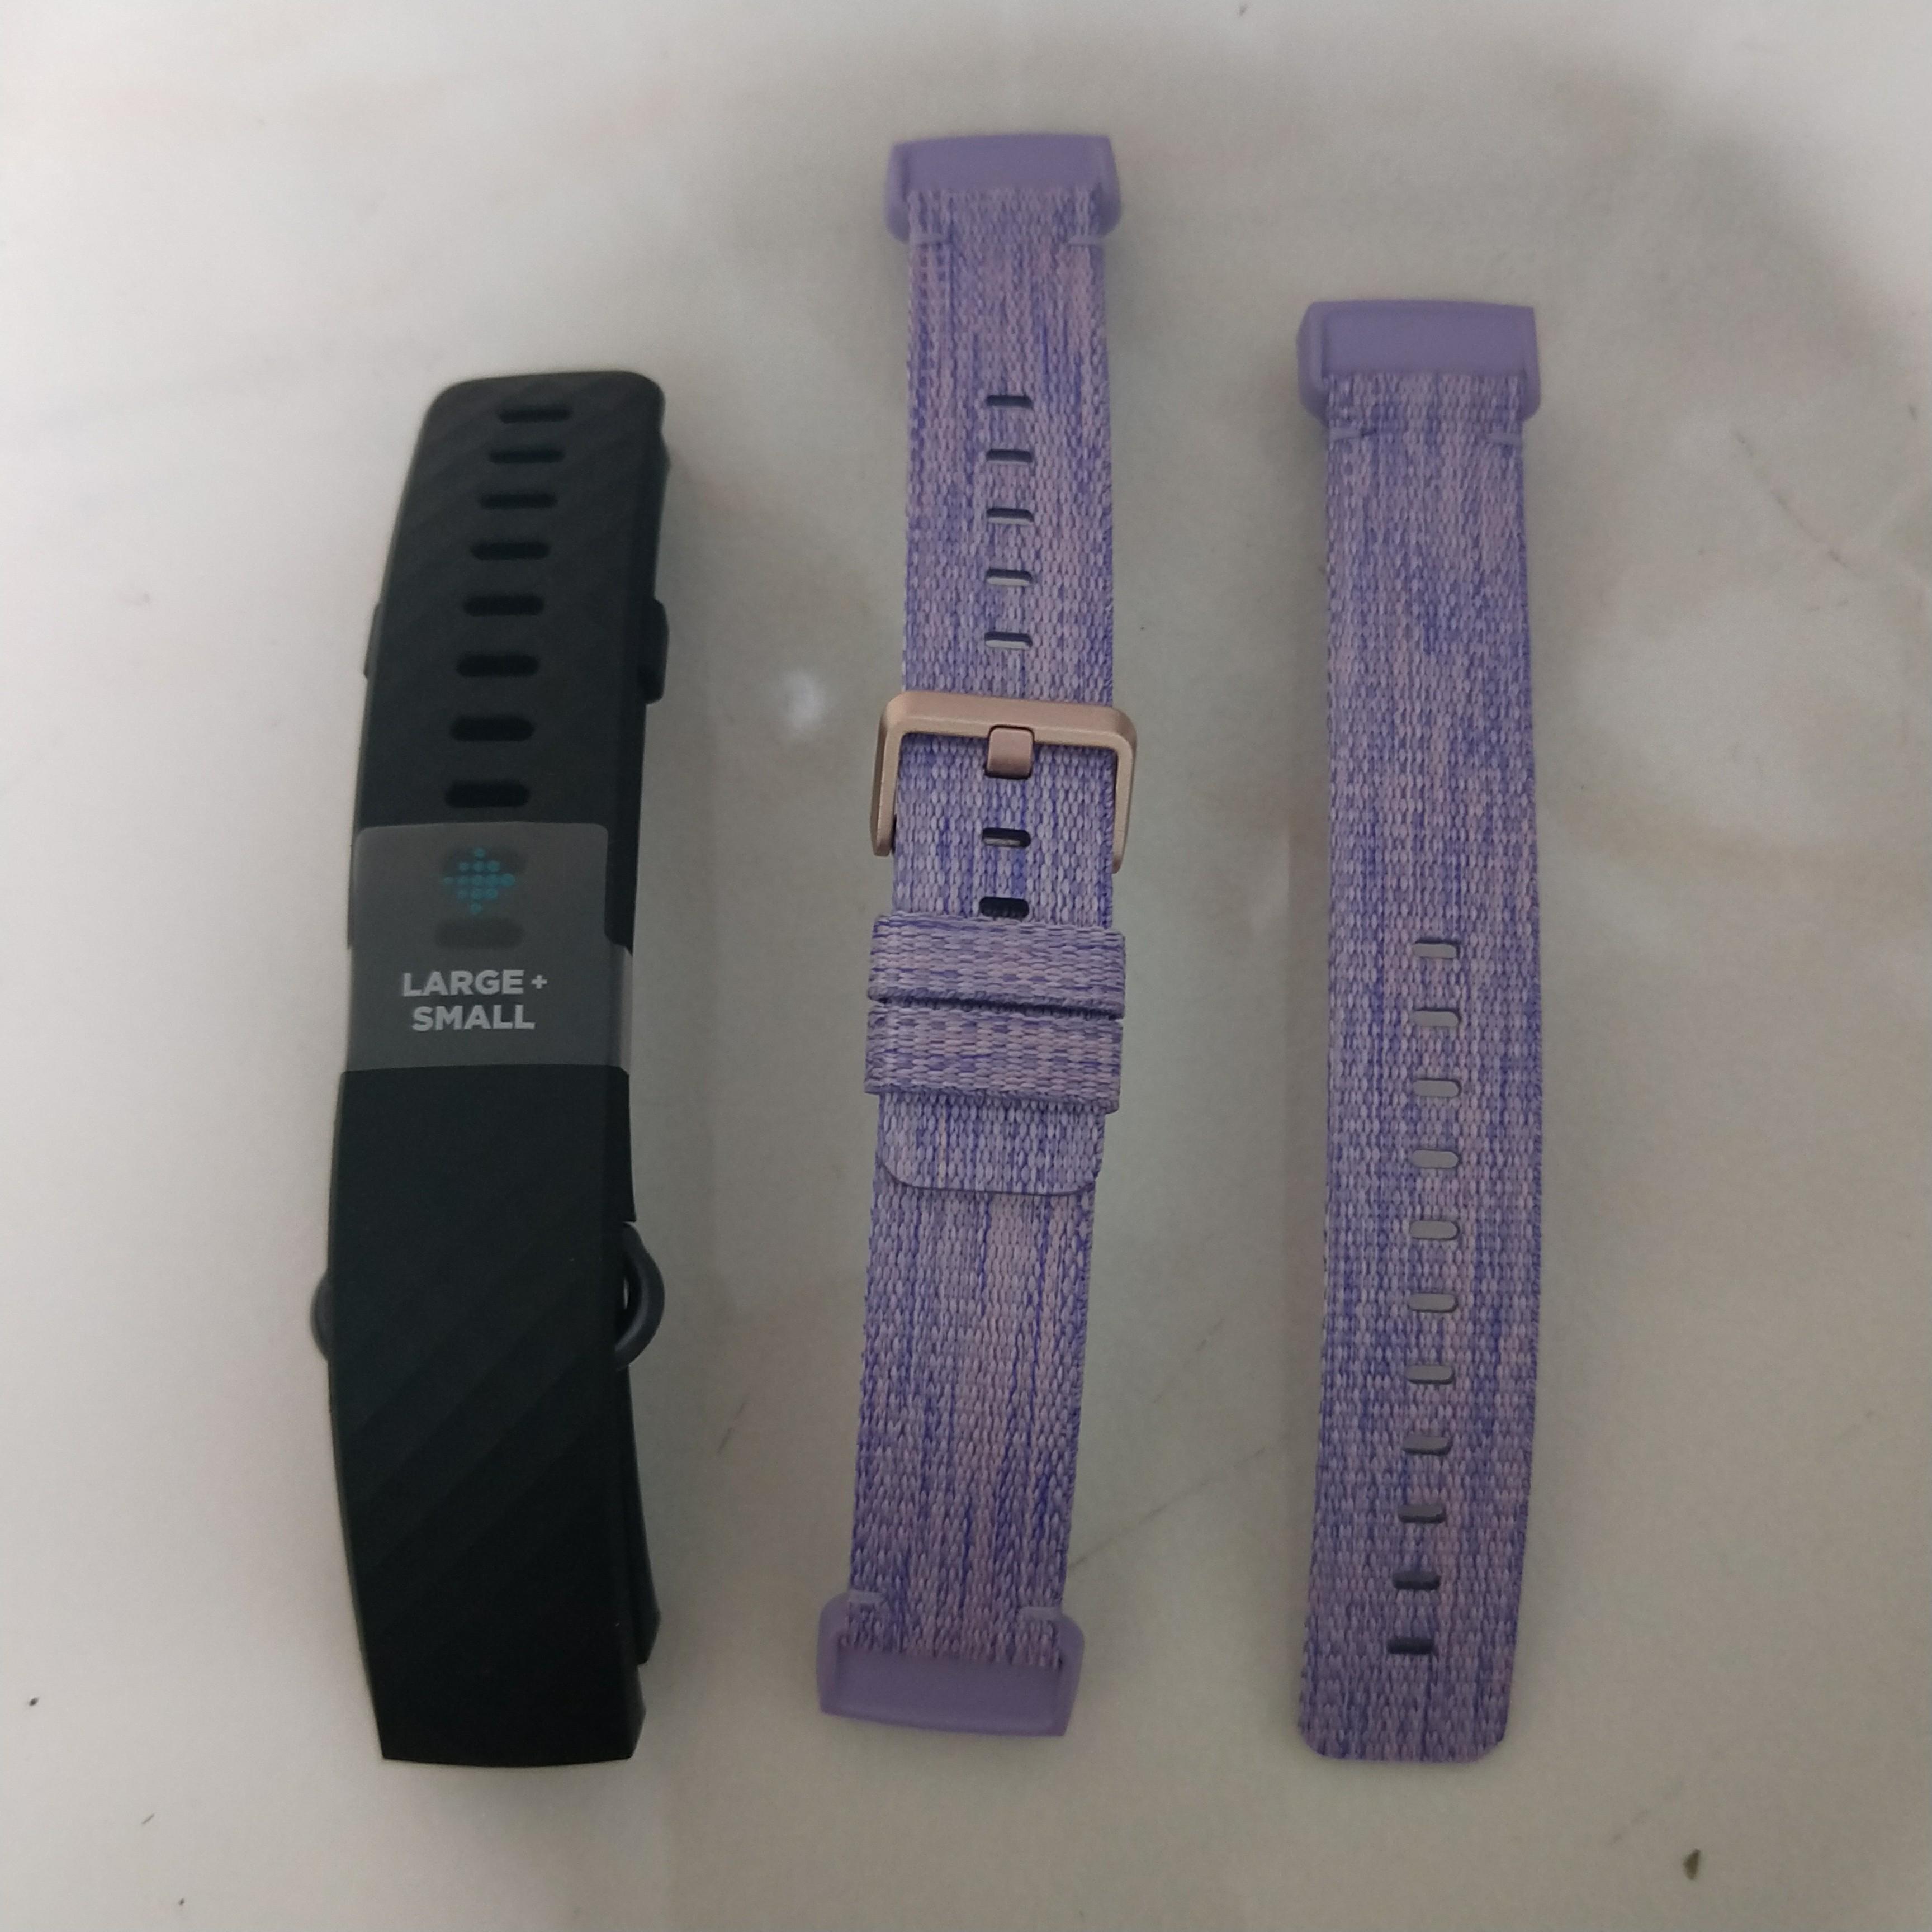 fitbit charge 3 charcoal woven band